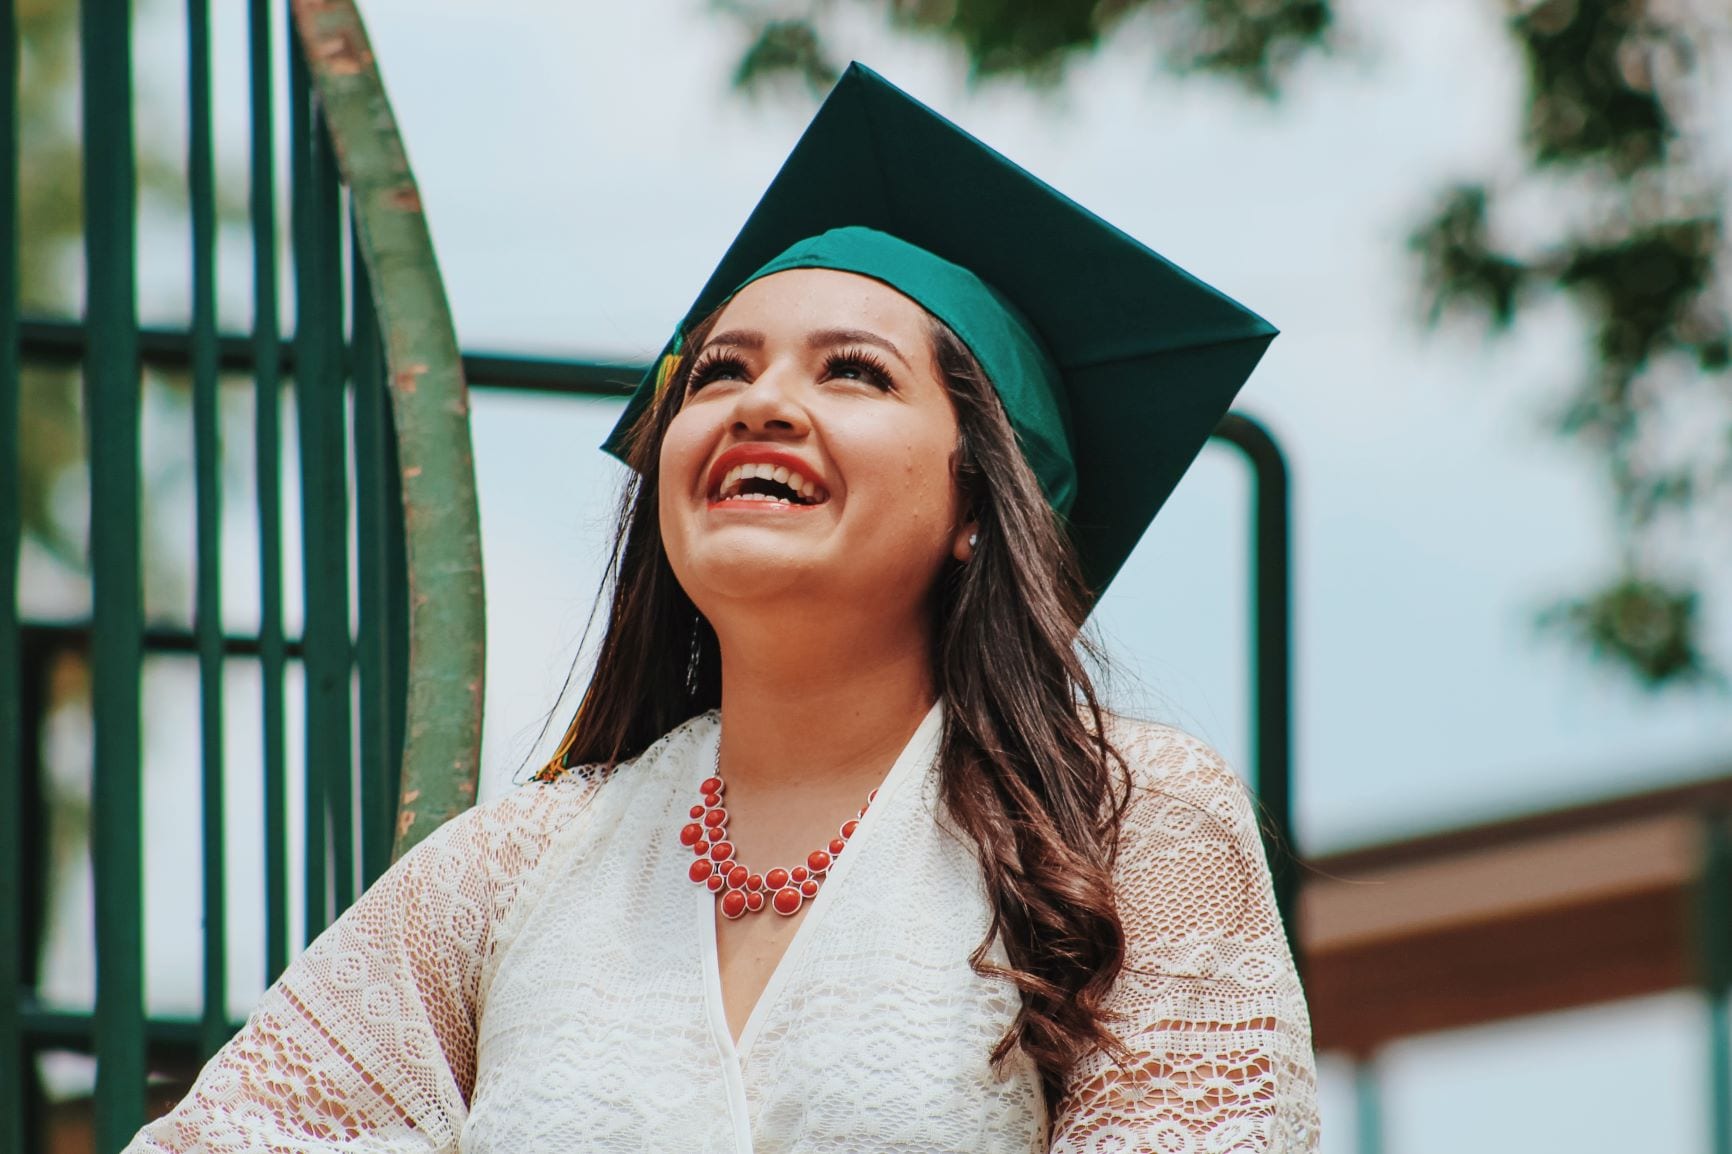 Woman wearing white and graduation cap looks up and smiles